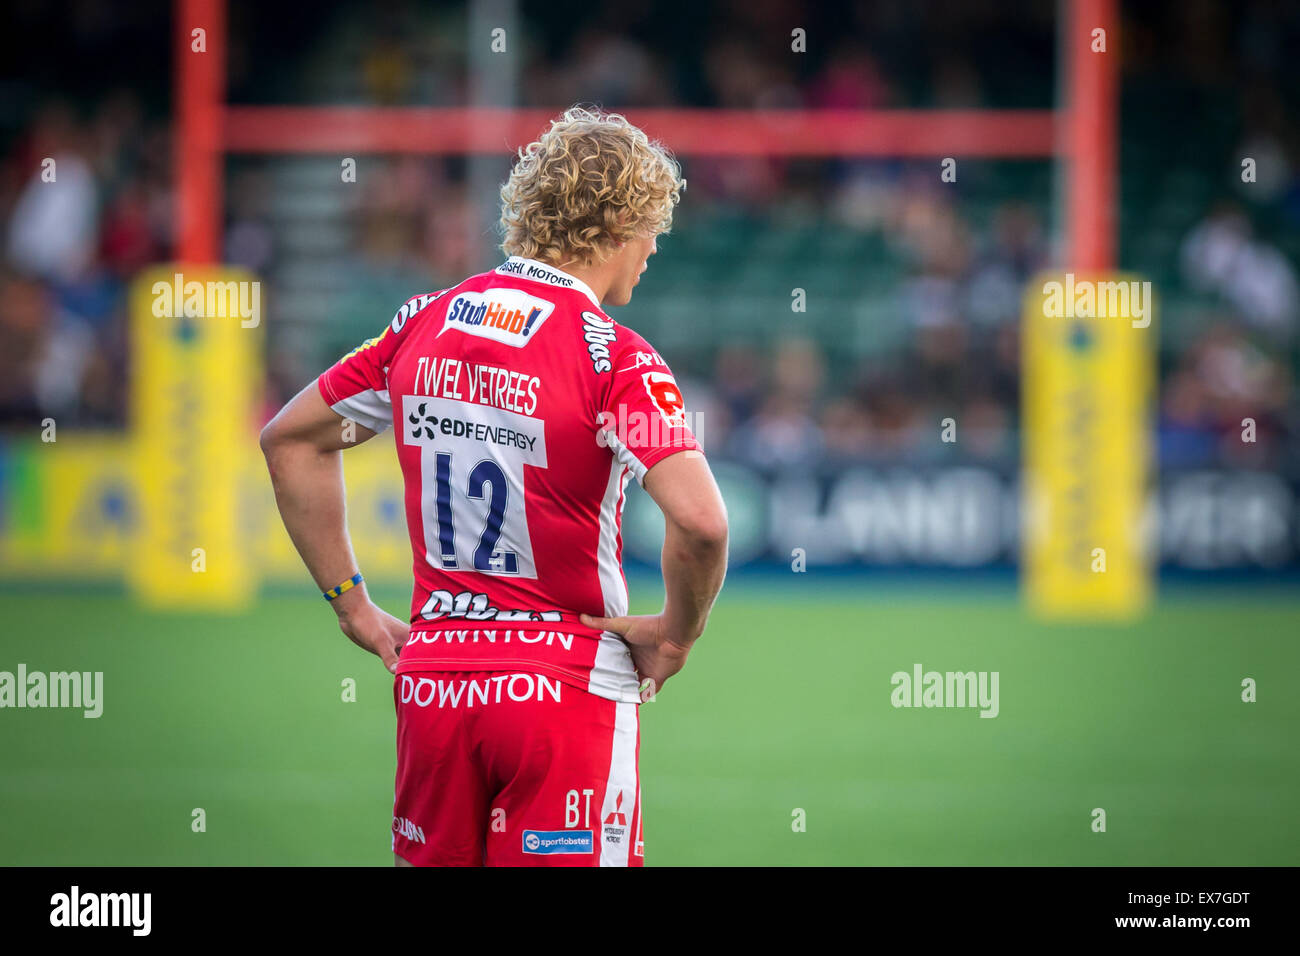 Gloucester's Billy Twelvetrees at Allianz Park ahead of their game against Saracens on October 11, 2014. Stock Photo